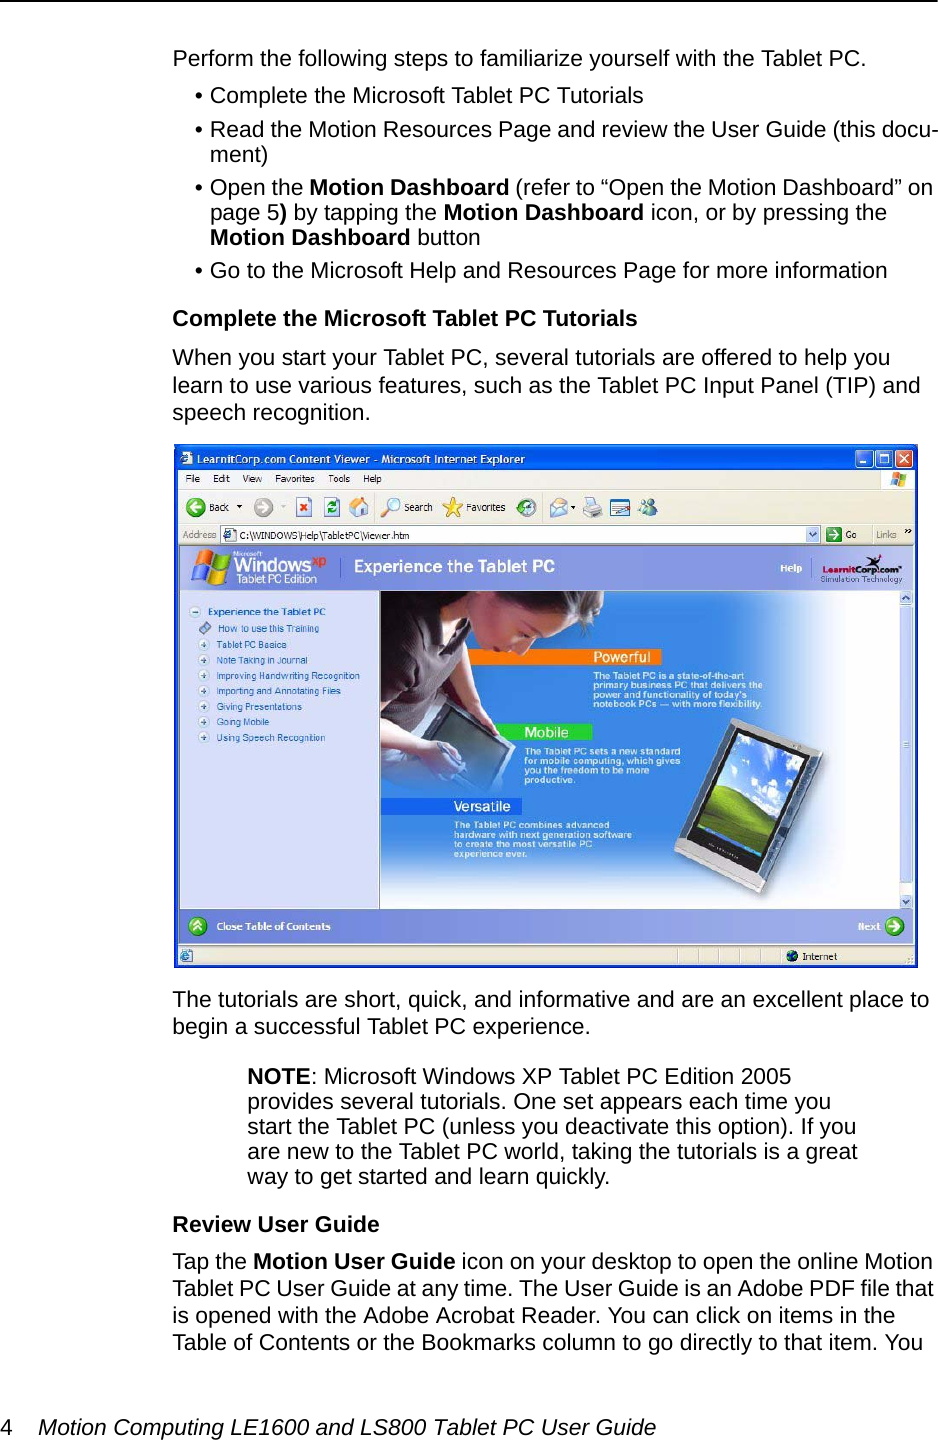 4Motion Computing LE1600 and LS800 Tablet PC User GuidePerform the following steps to familiarize yourself with the Tablet PC.• Complete the Microsoft Tablet PC Tutorials• Read the Motion Resources Page and review the User Guide (this docu-ment)• Open the Motion Dashboard (refer to “Open the Motion Dashboard” on page 5) by tapping the Motion Dashboard icon, or by pressing the Motion Dashboard button• Go to the Microsoft Help and Resources Page for more informationComplete the Microsoft Tablet PC TutorialsWhen you start your Tablet PC, several tutorials are offered to help you learn to use various features, such as the Tablet PC Input Panel (TIP) and speech recognition.The tutorials are short, quick, and informative and are an excellent place to begin a successful Tablet PC experience.NOTE: Microsoft Windows XP Tablet PC Edition 2005 provides several tutorials. One set appears each time you start the Tablet PC (unless you deactivate this option). If you are new to the Tablet PC world, taking the tutorials is a great way to get started and learn quickly.Review User GuideTap the Motion User Guide icon on your desktop to open the online Motion Tablet PC User Guide at any time. The User Guide is an Adobe PDF file that is opened with the Adobe Acrobat Reader. You can click on items in the Table of Contents or the Bookmarks column to go directly to that item. You 